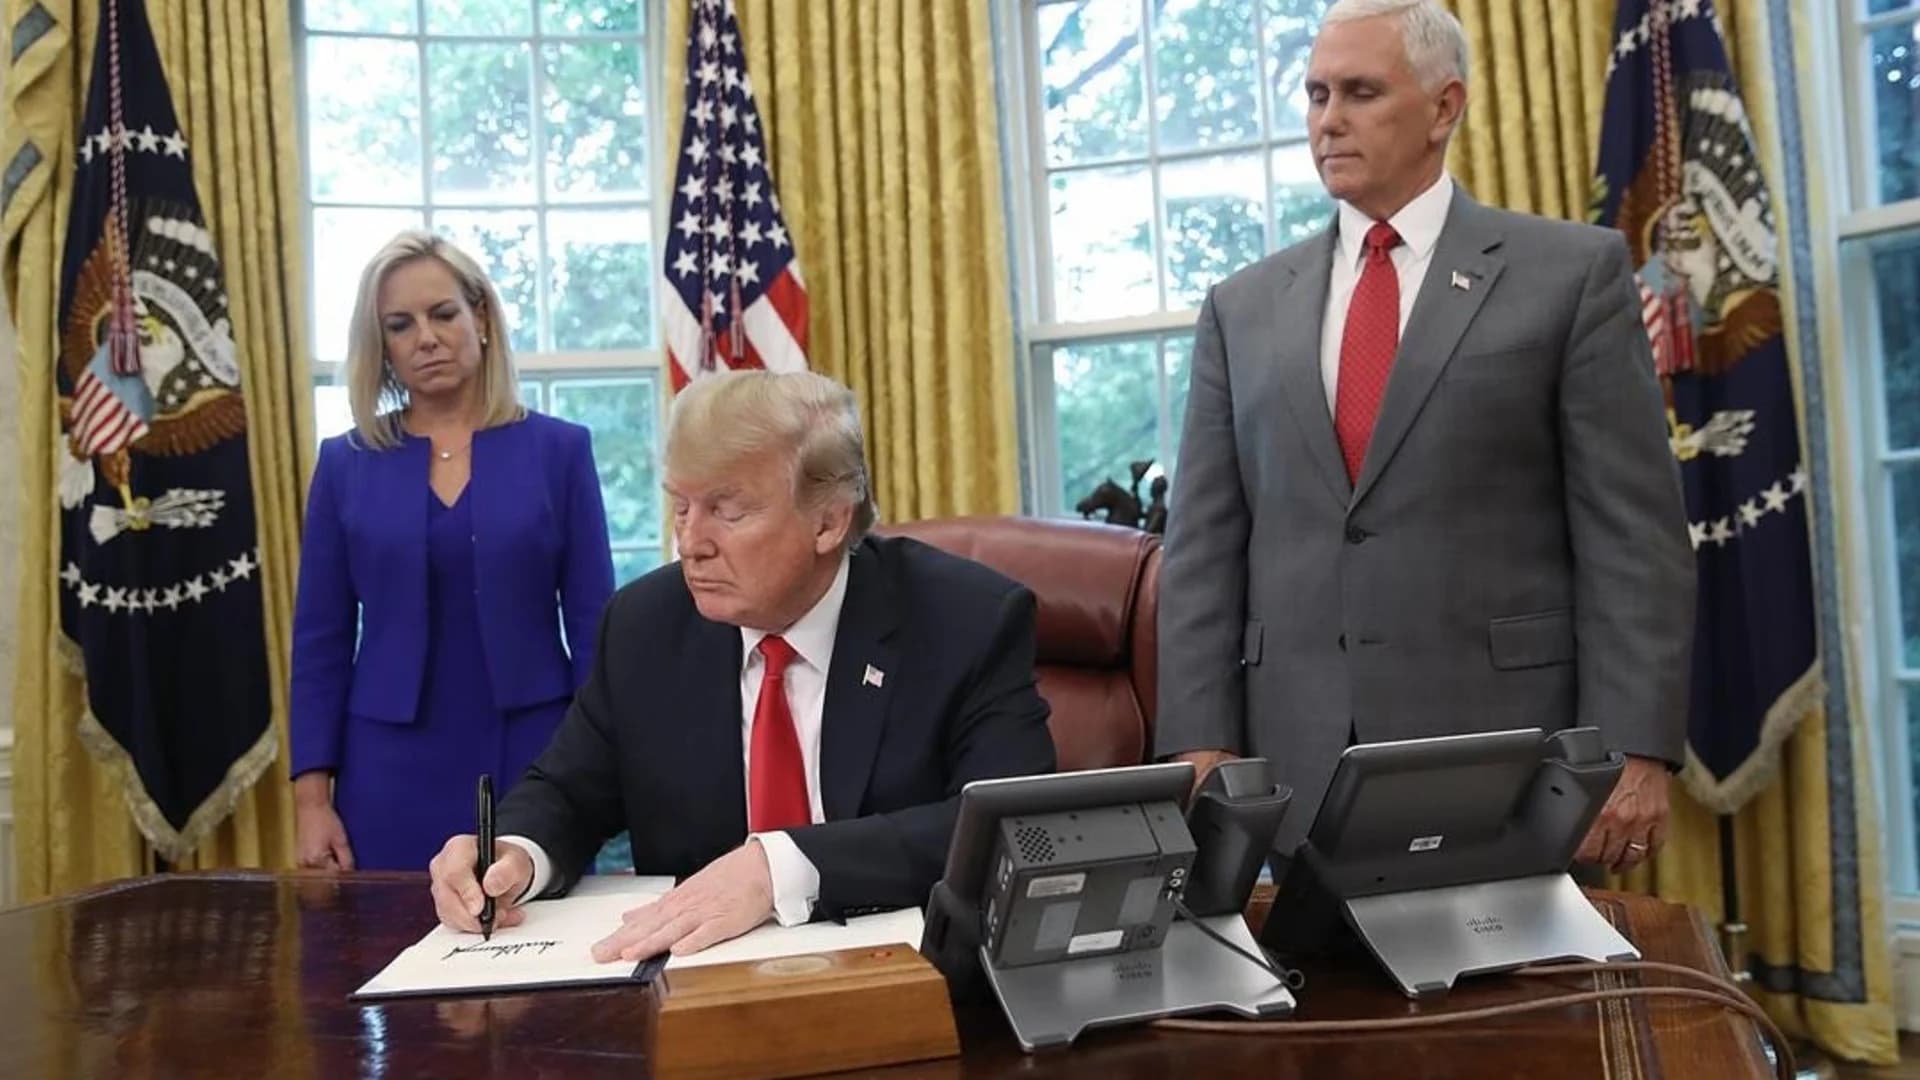 In reversal, Trump signs order stopping family separation